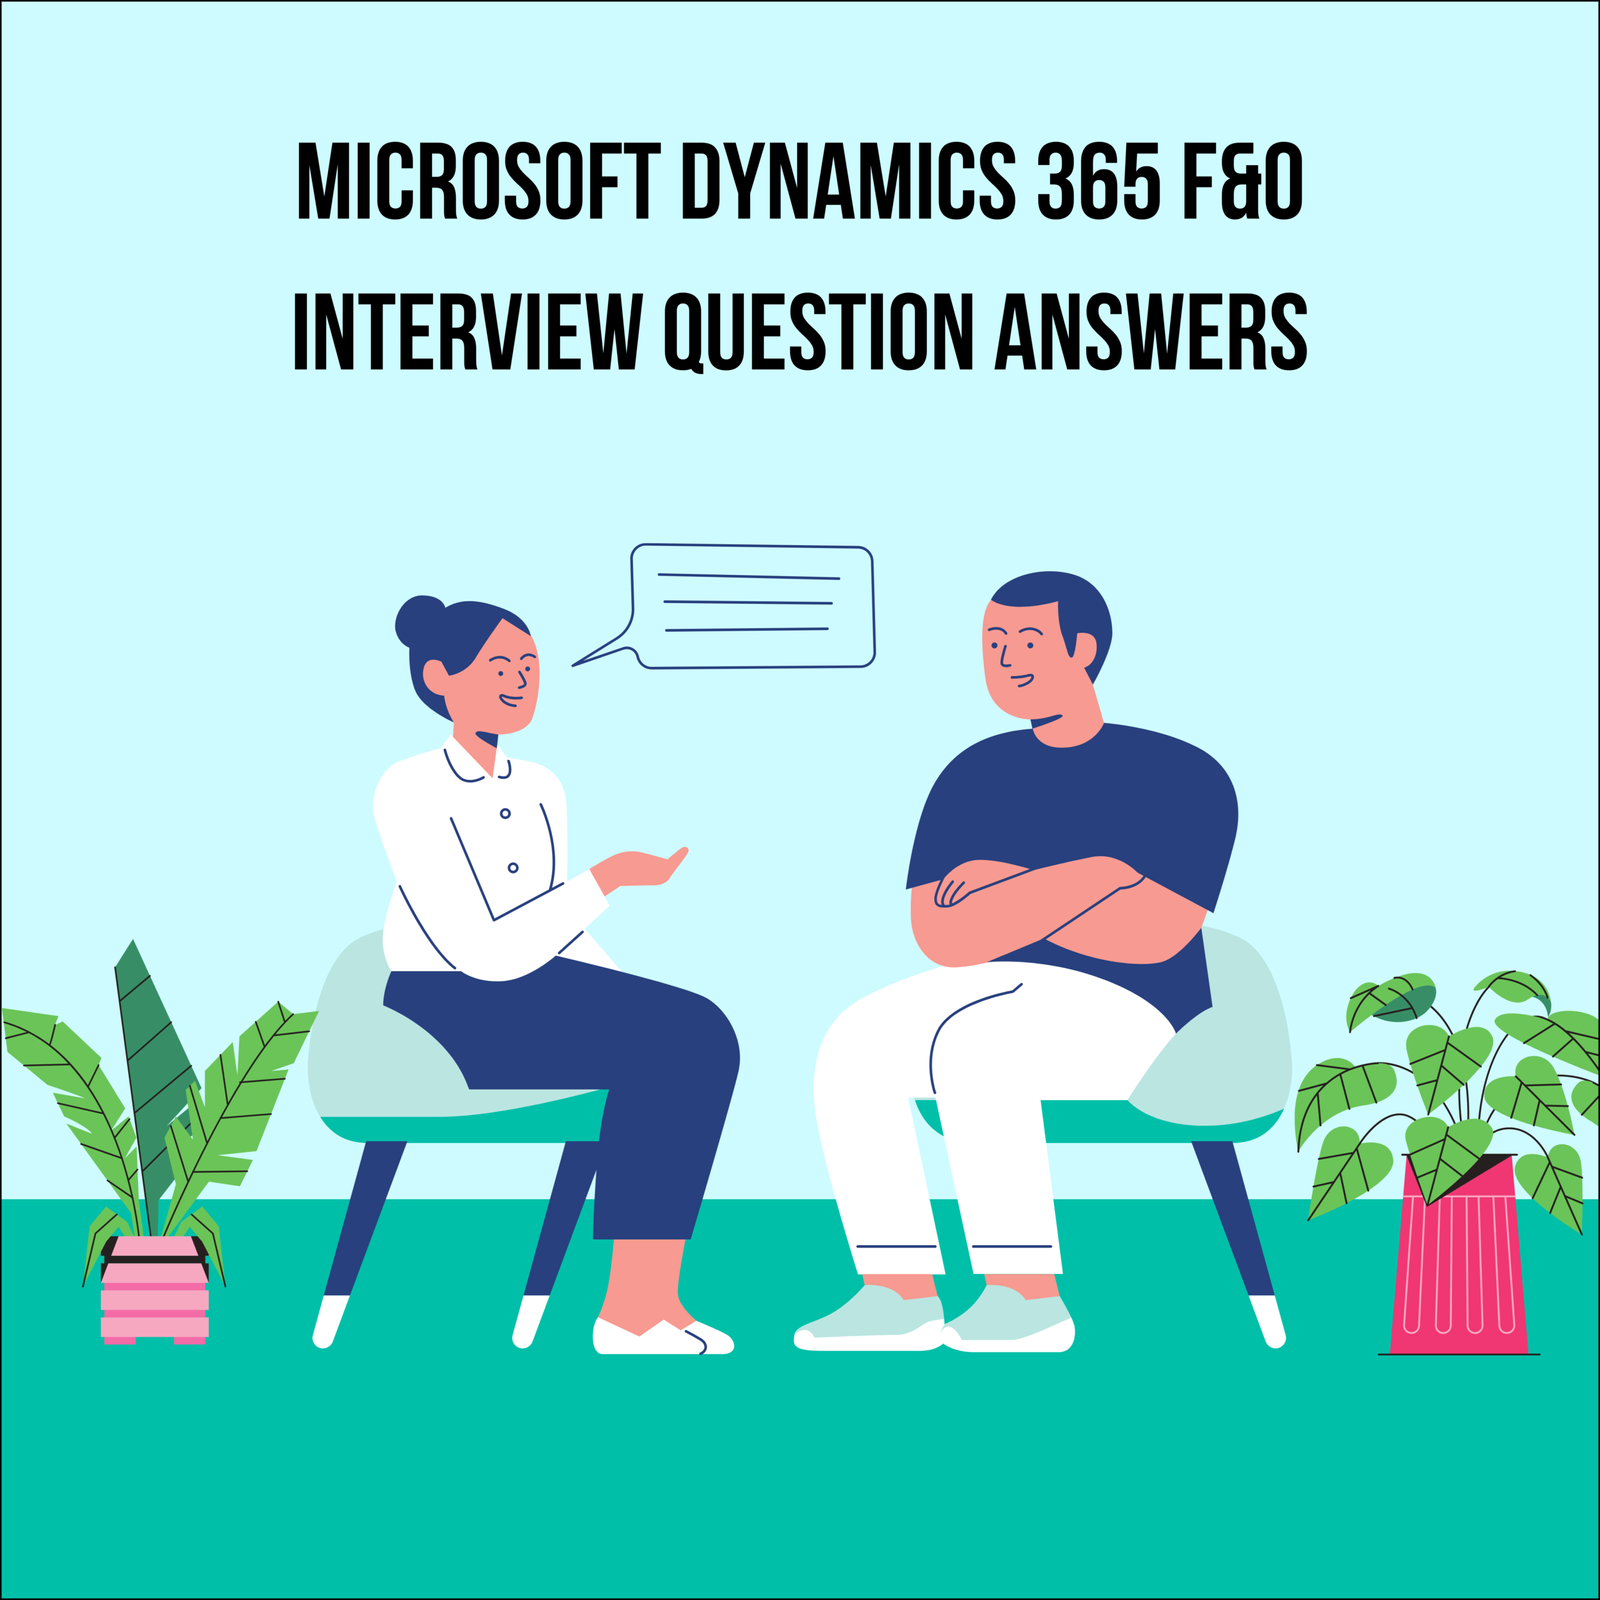 Microsoft Dynamics 365 F&O Interview Question Answers